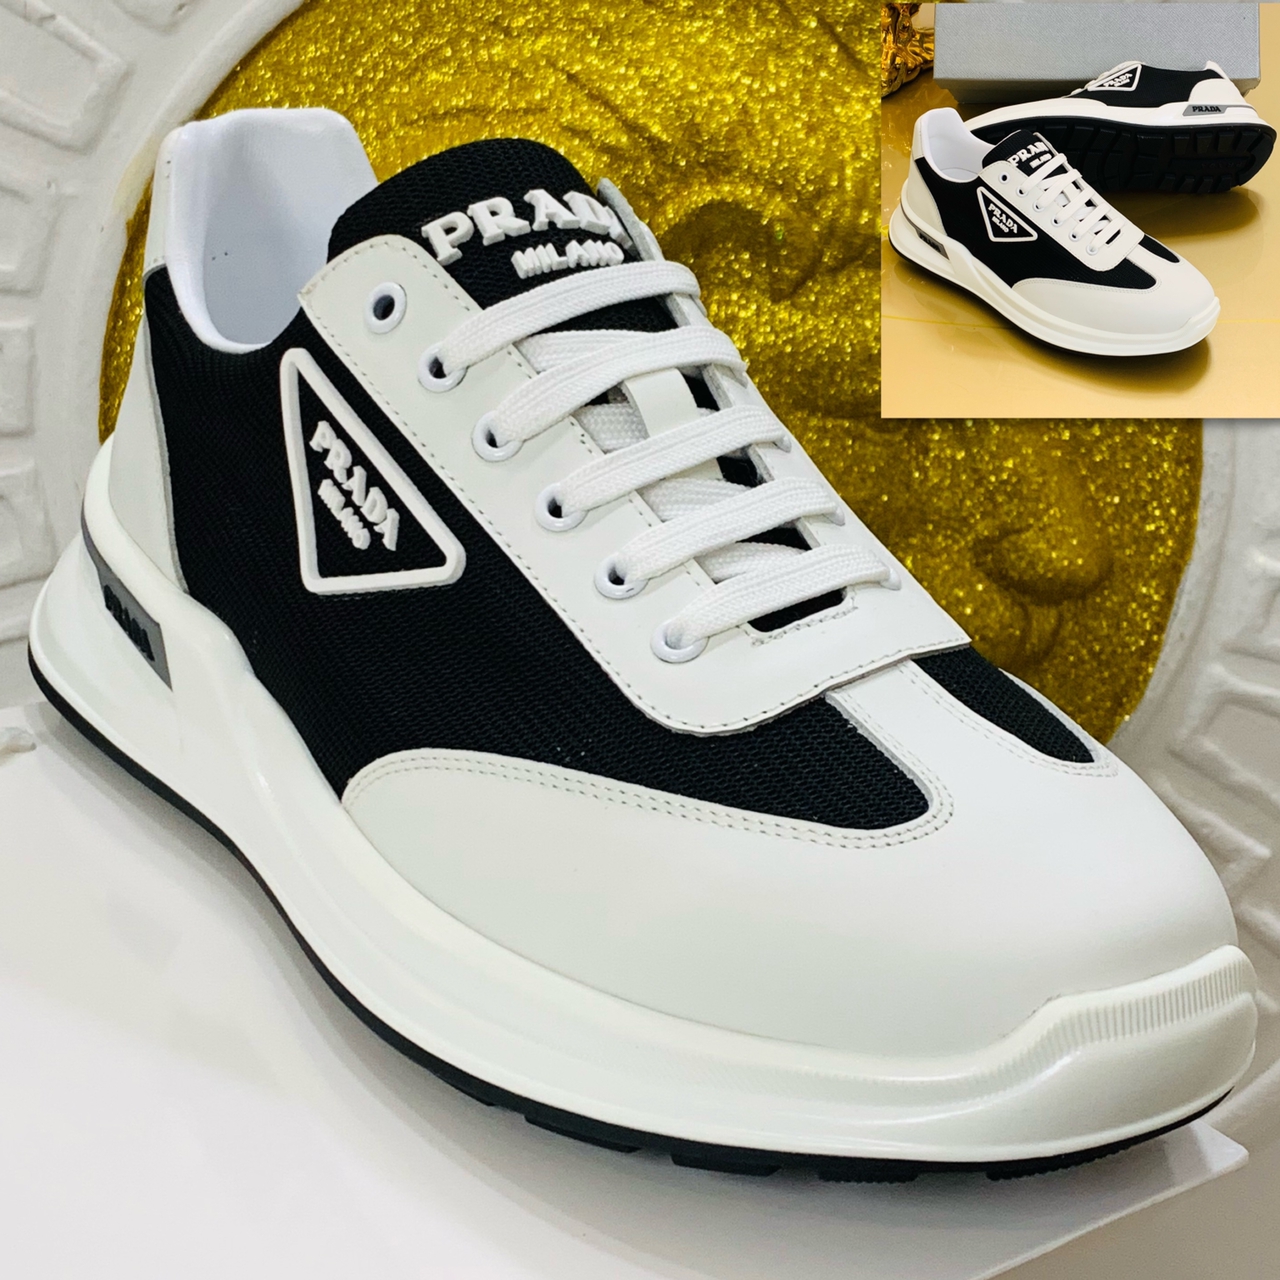 DESIGNERS CASUAL LEATHER LOGO SNEAKERS for CartRollers Marketplace For Shopping Online, Fashion, Electronics, Phones, Computers and Buy Men Shoe, Home Appliances, Kitchenwares, Groceries Accessories,ankara, Aso Ebi, Beads, Boys Casual Wears, Children Children's Wears ,Corporate Shoes, Cosmetics Dress ,Dresses Fashion, Girls' Dresses ,Girls' Wears, Hair Care ,Jewelries ,Jewelry Kids, Kids' Fashion Ladies ,Wears Lapel Pins, Loafers Shoe Men ,Men's Caftan, Men's Casual Soes, Men's Fashion, Men's Shoes, Men's Wears, Moccasin Shoe, Natural Hair, In Lagos Nigeria